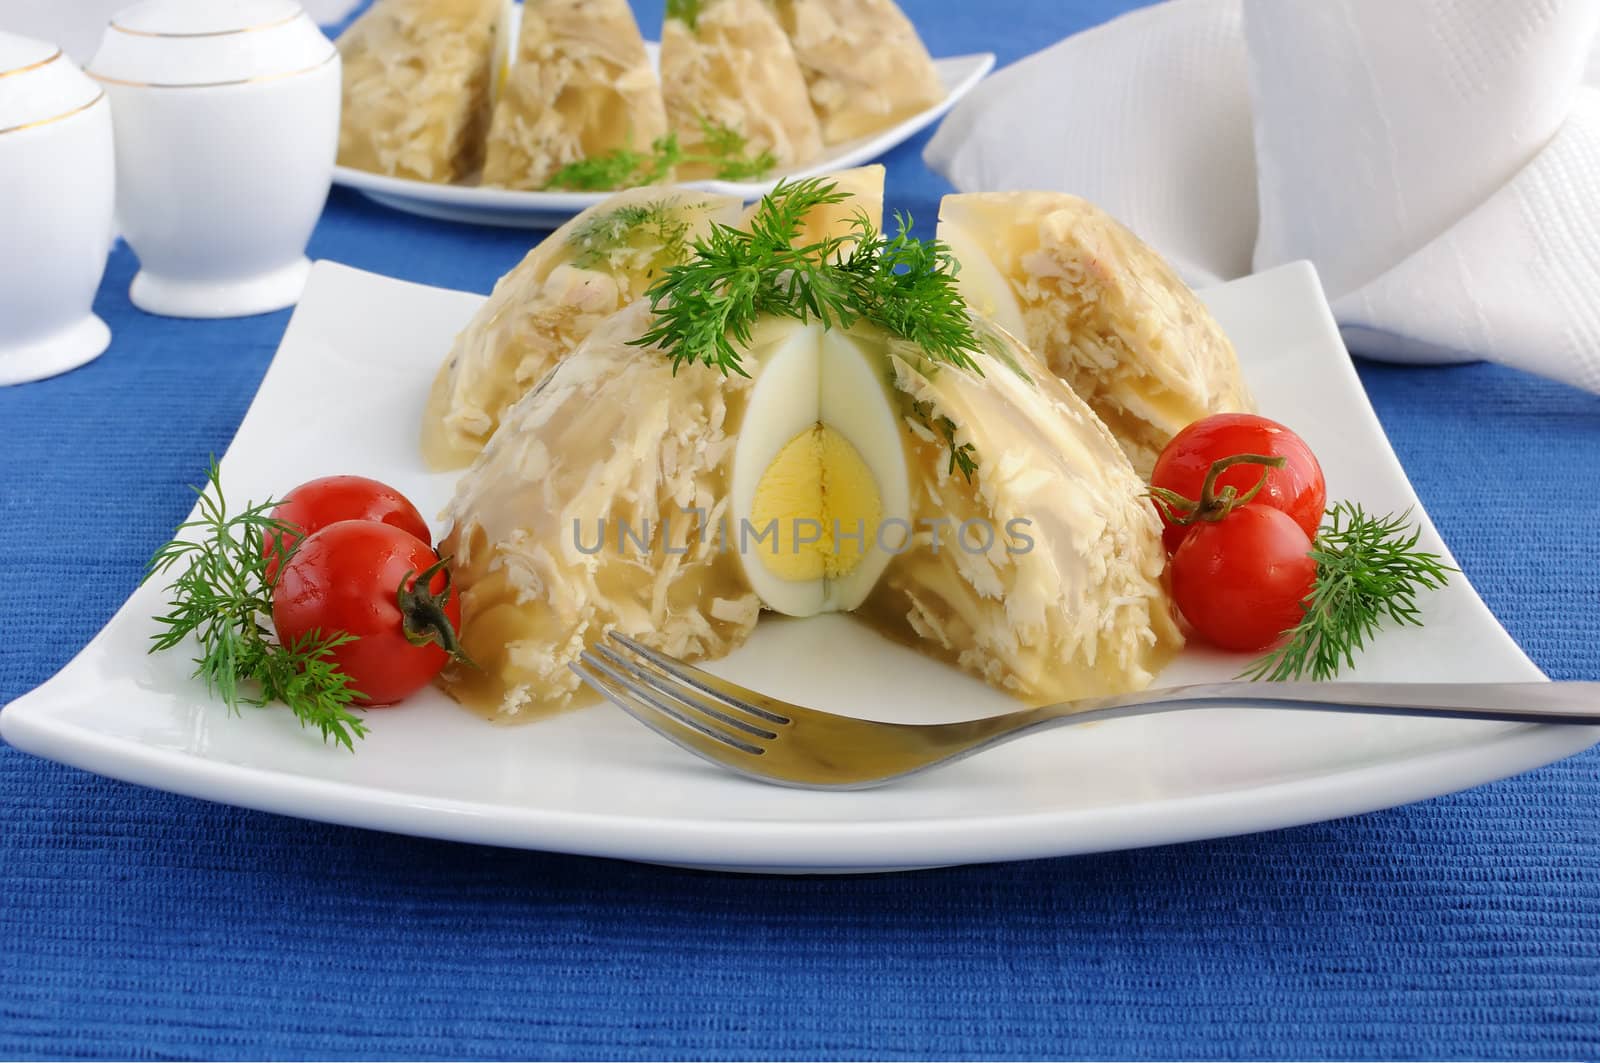 Jellied Chicken by Apolonia